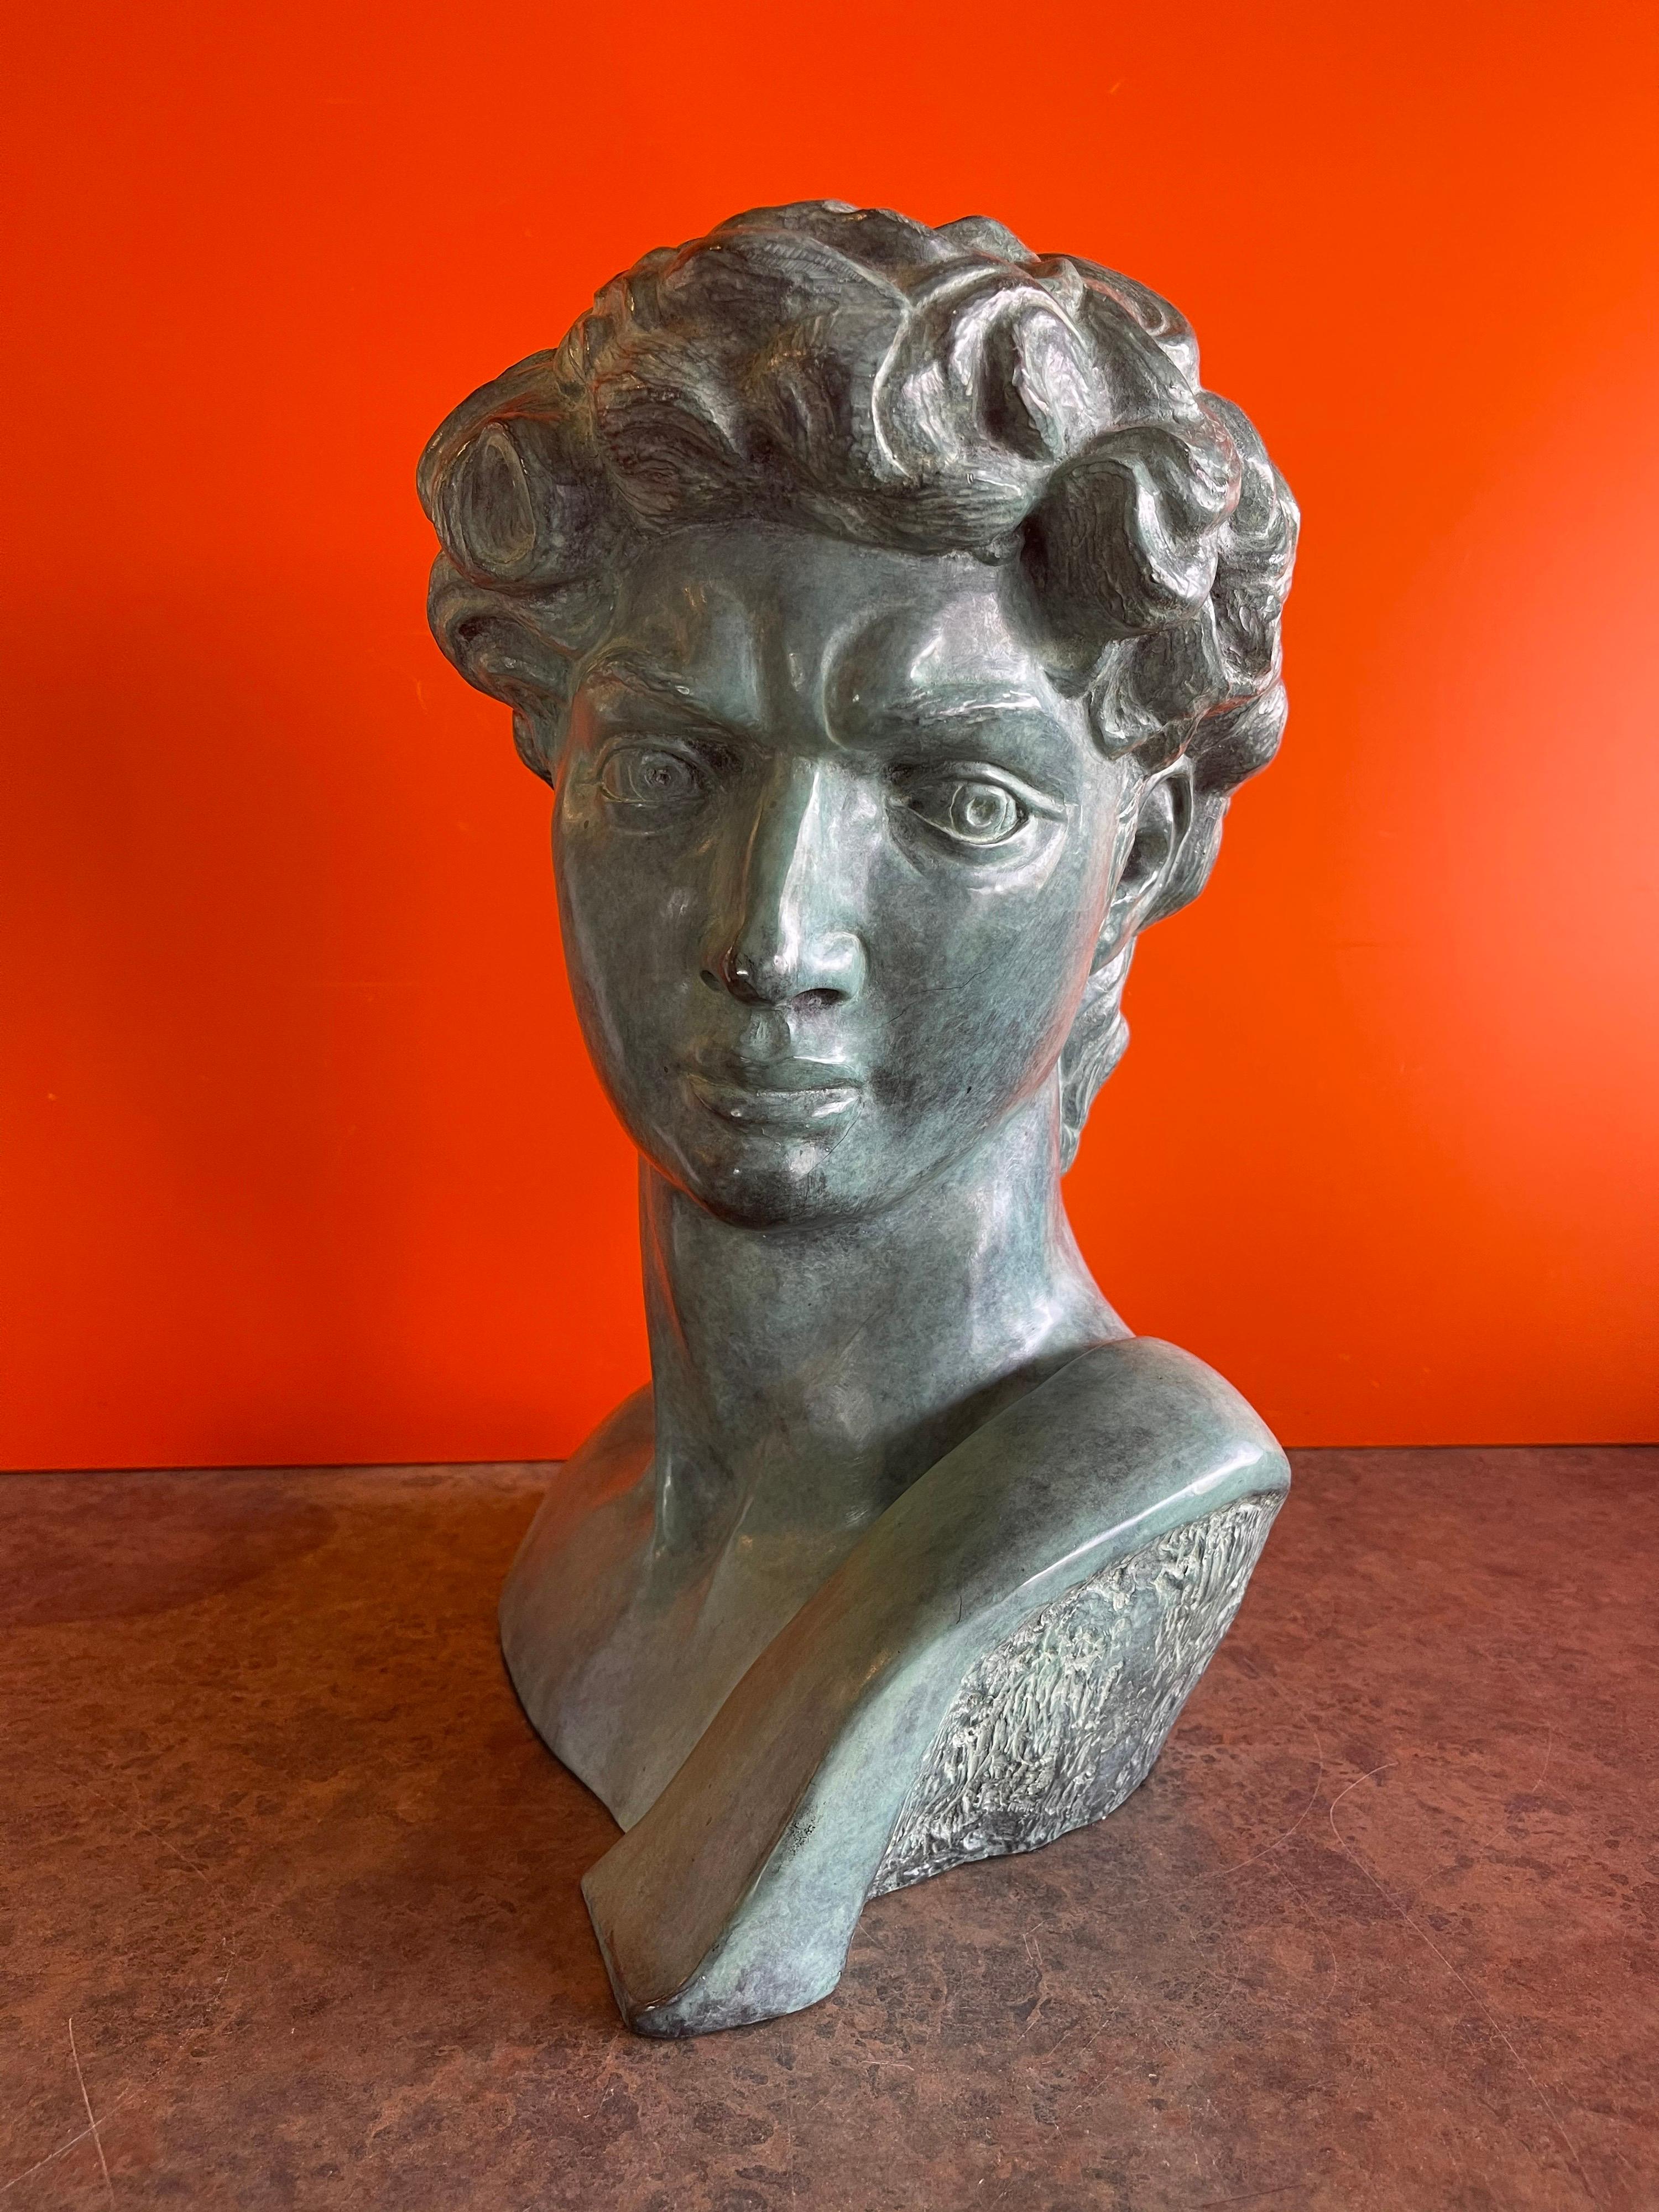 A very nice patinated verdigris bronze bust of Michelangelo's David by Felix de Weldon, circa 1993. The piece is signed and dated by the artist and marked 6 / 25 AP; it is in very good condition and makes a wonderful statement in any room! #1532.